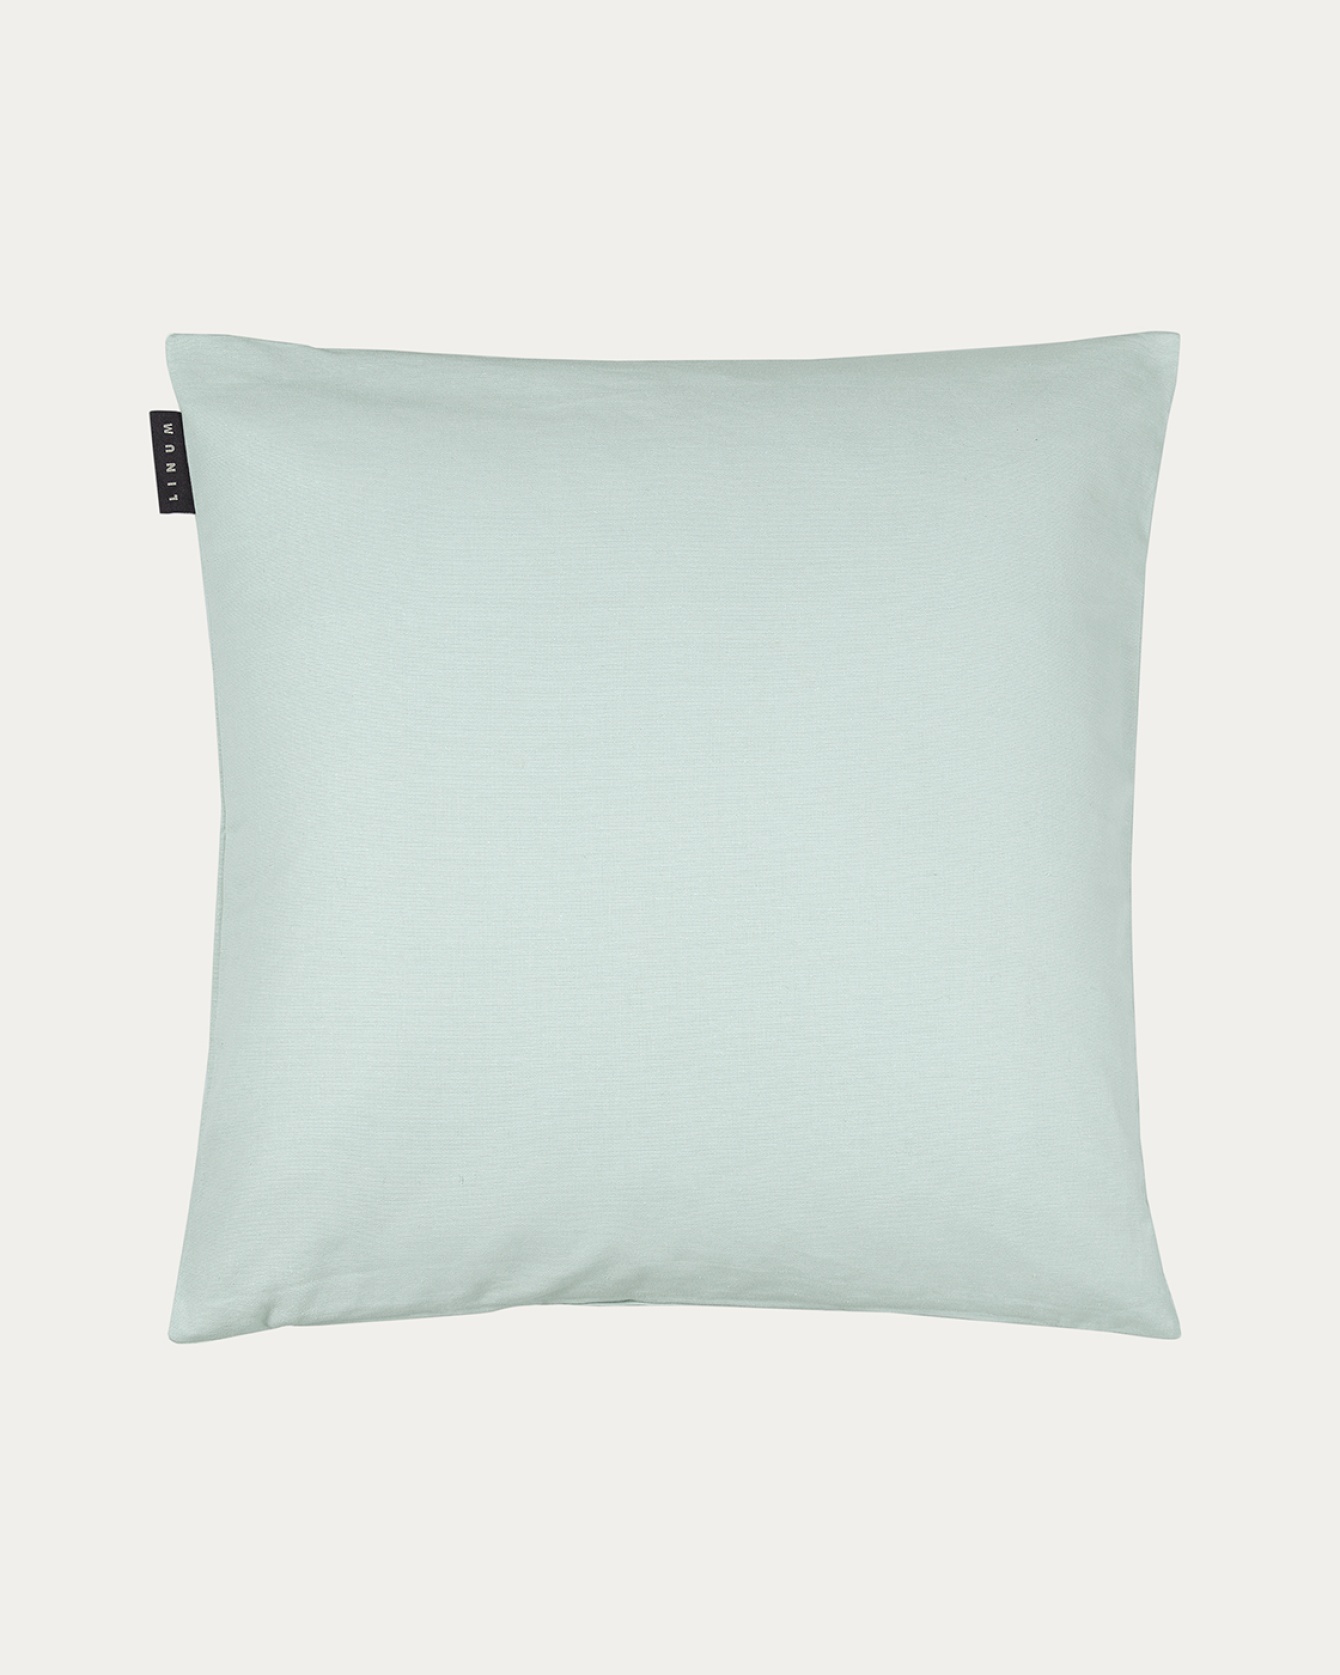 Product image light ice green ANNABELL cushion cover made of soft cotton from LINUM DESIGN. Size 50x50 cm.